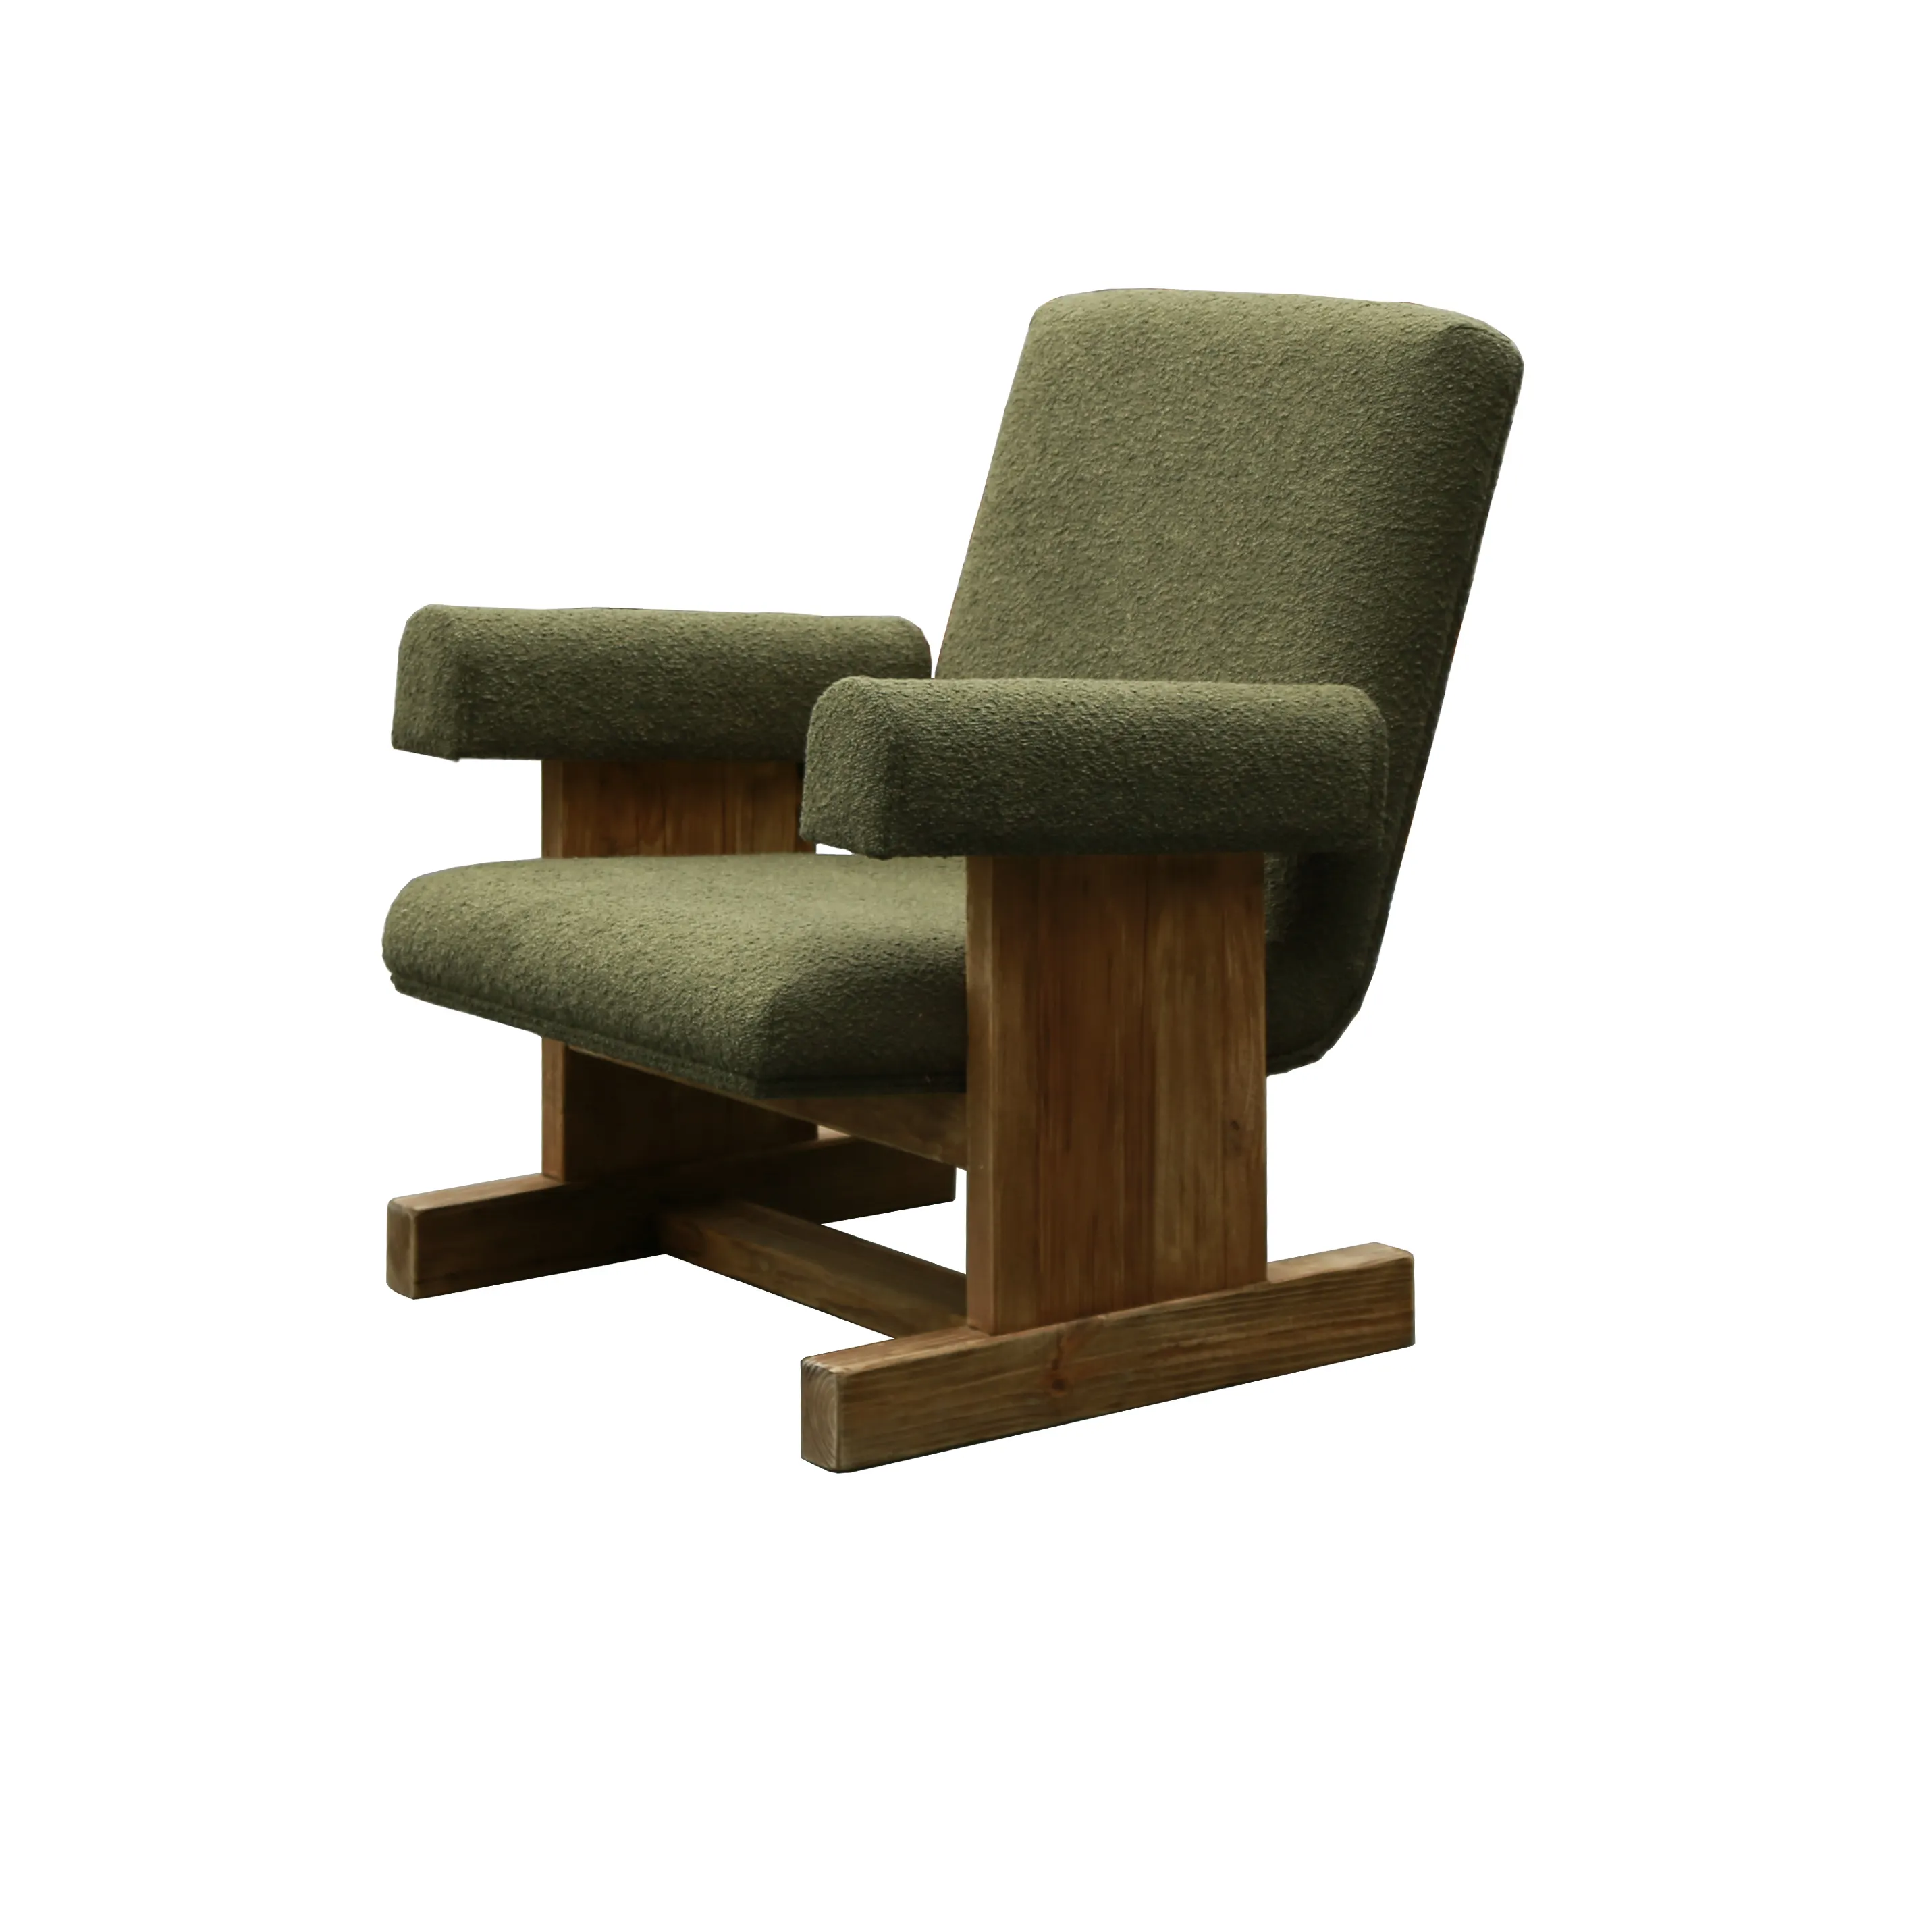 Lounge chairs modern leisure   Recliner with solid wood frame  Single  lounge chairs